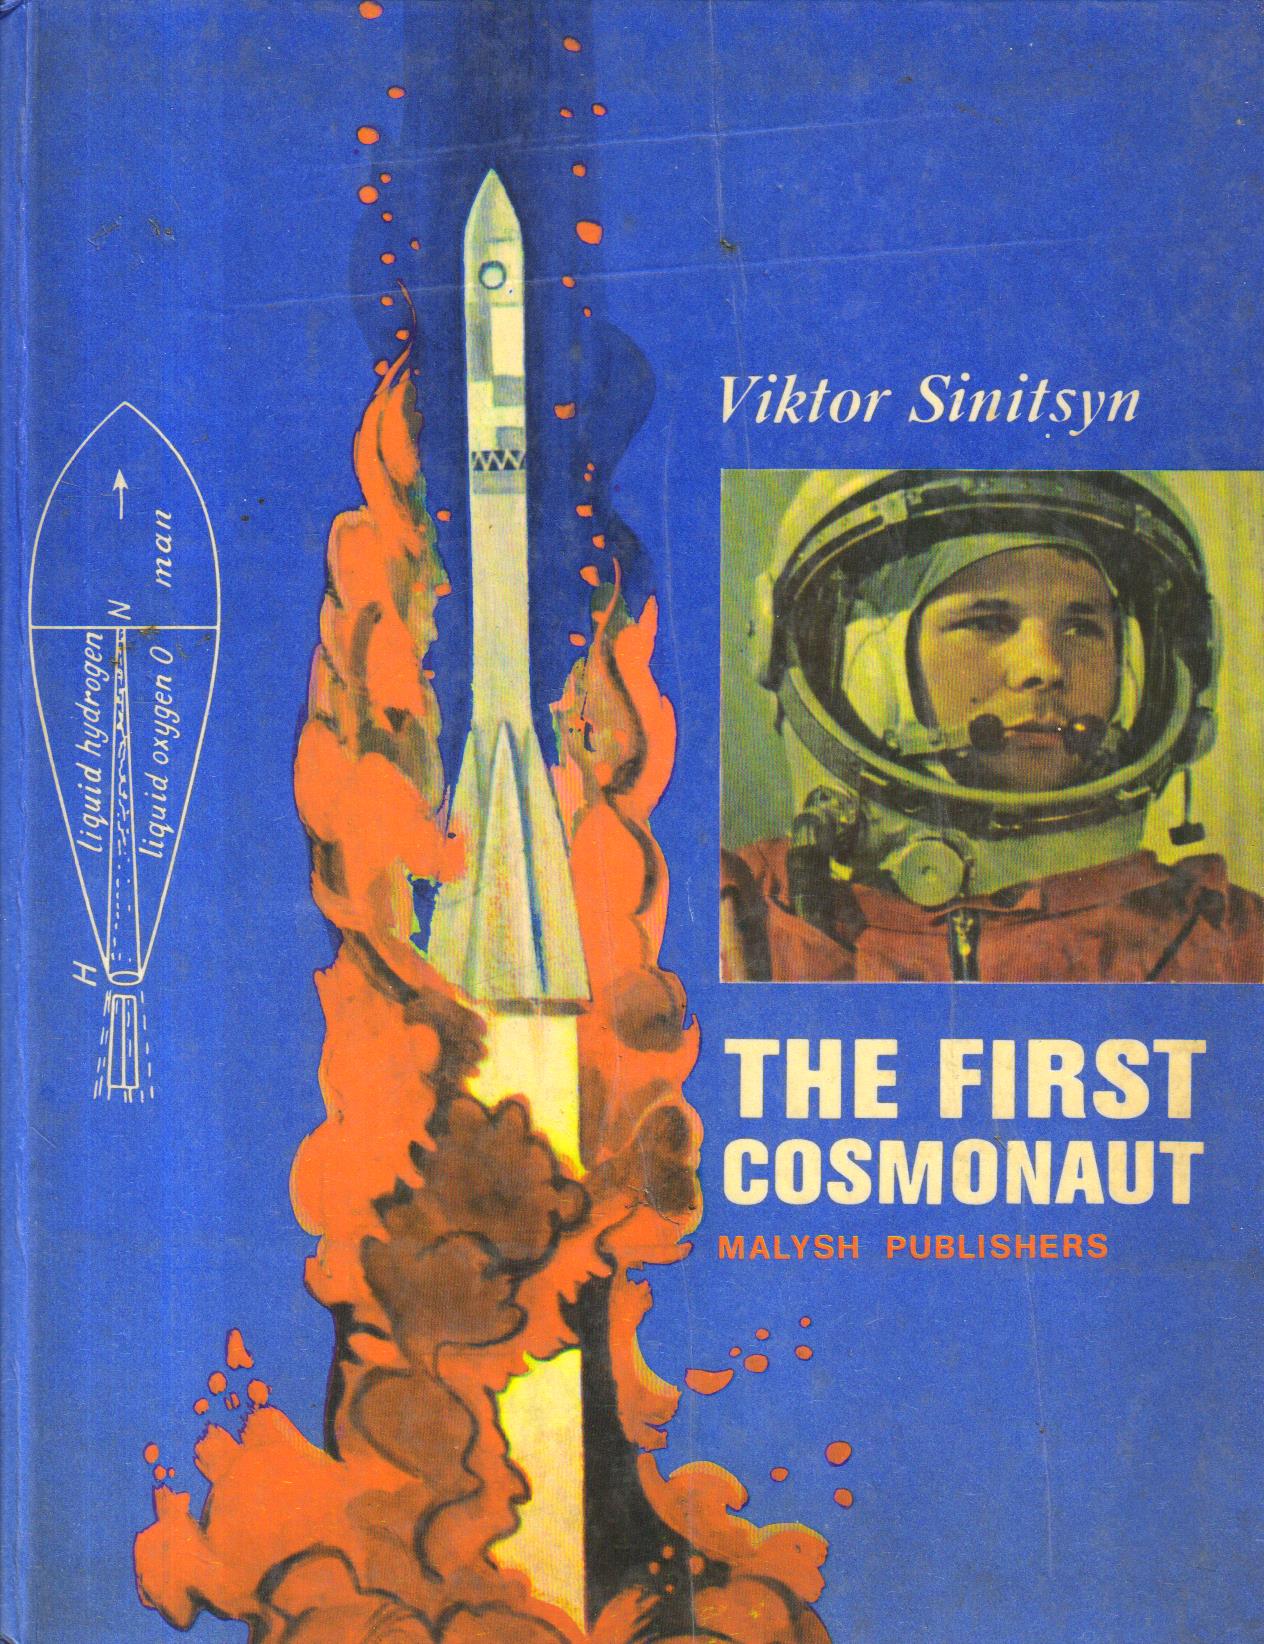 The First Cosmonaut.